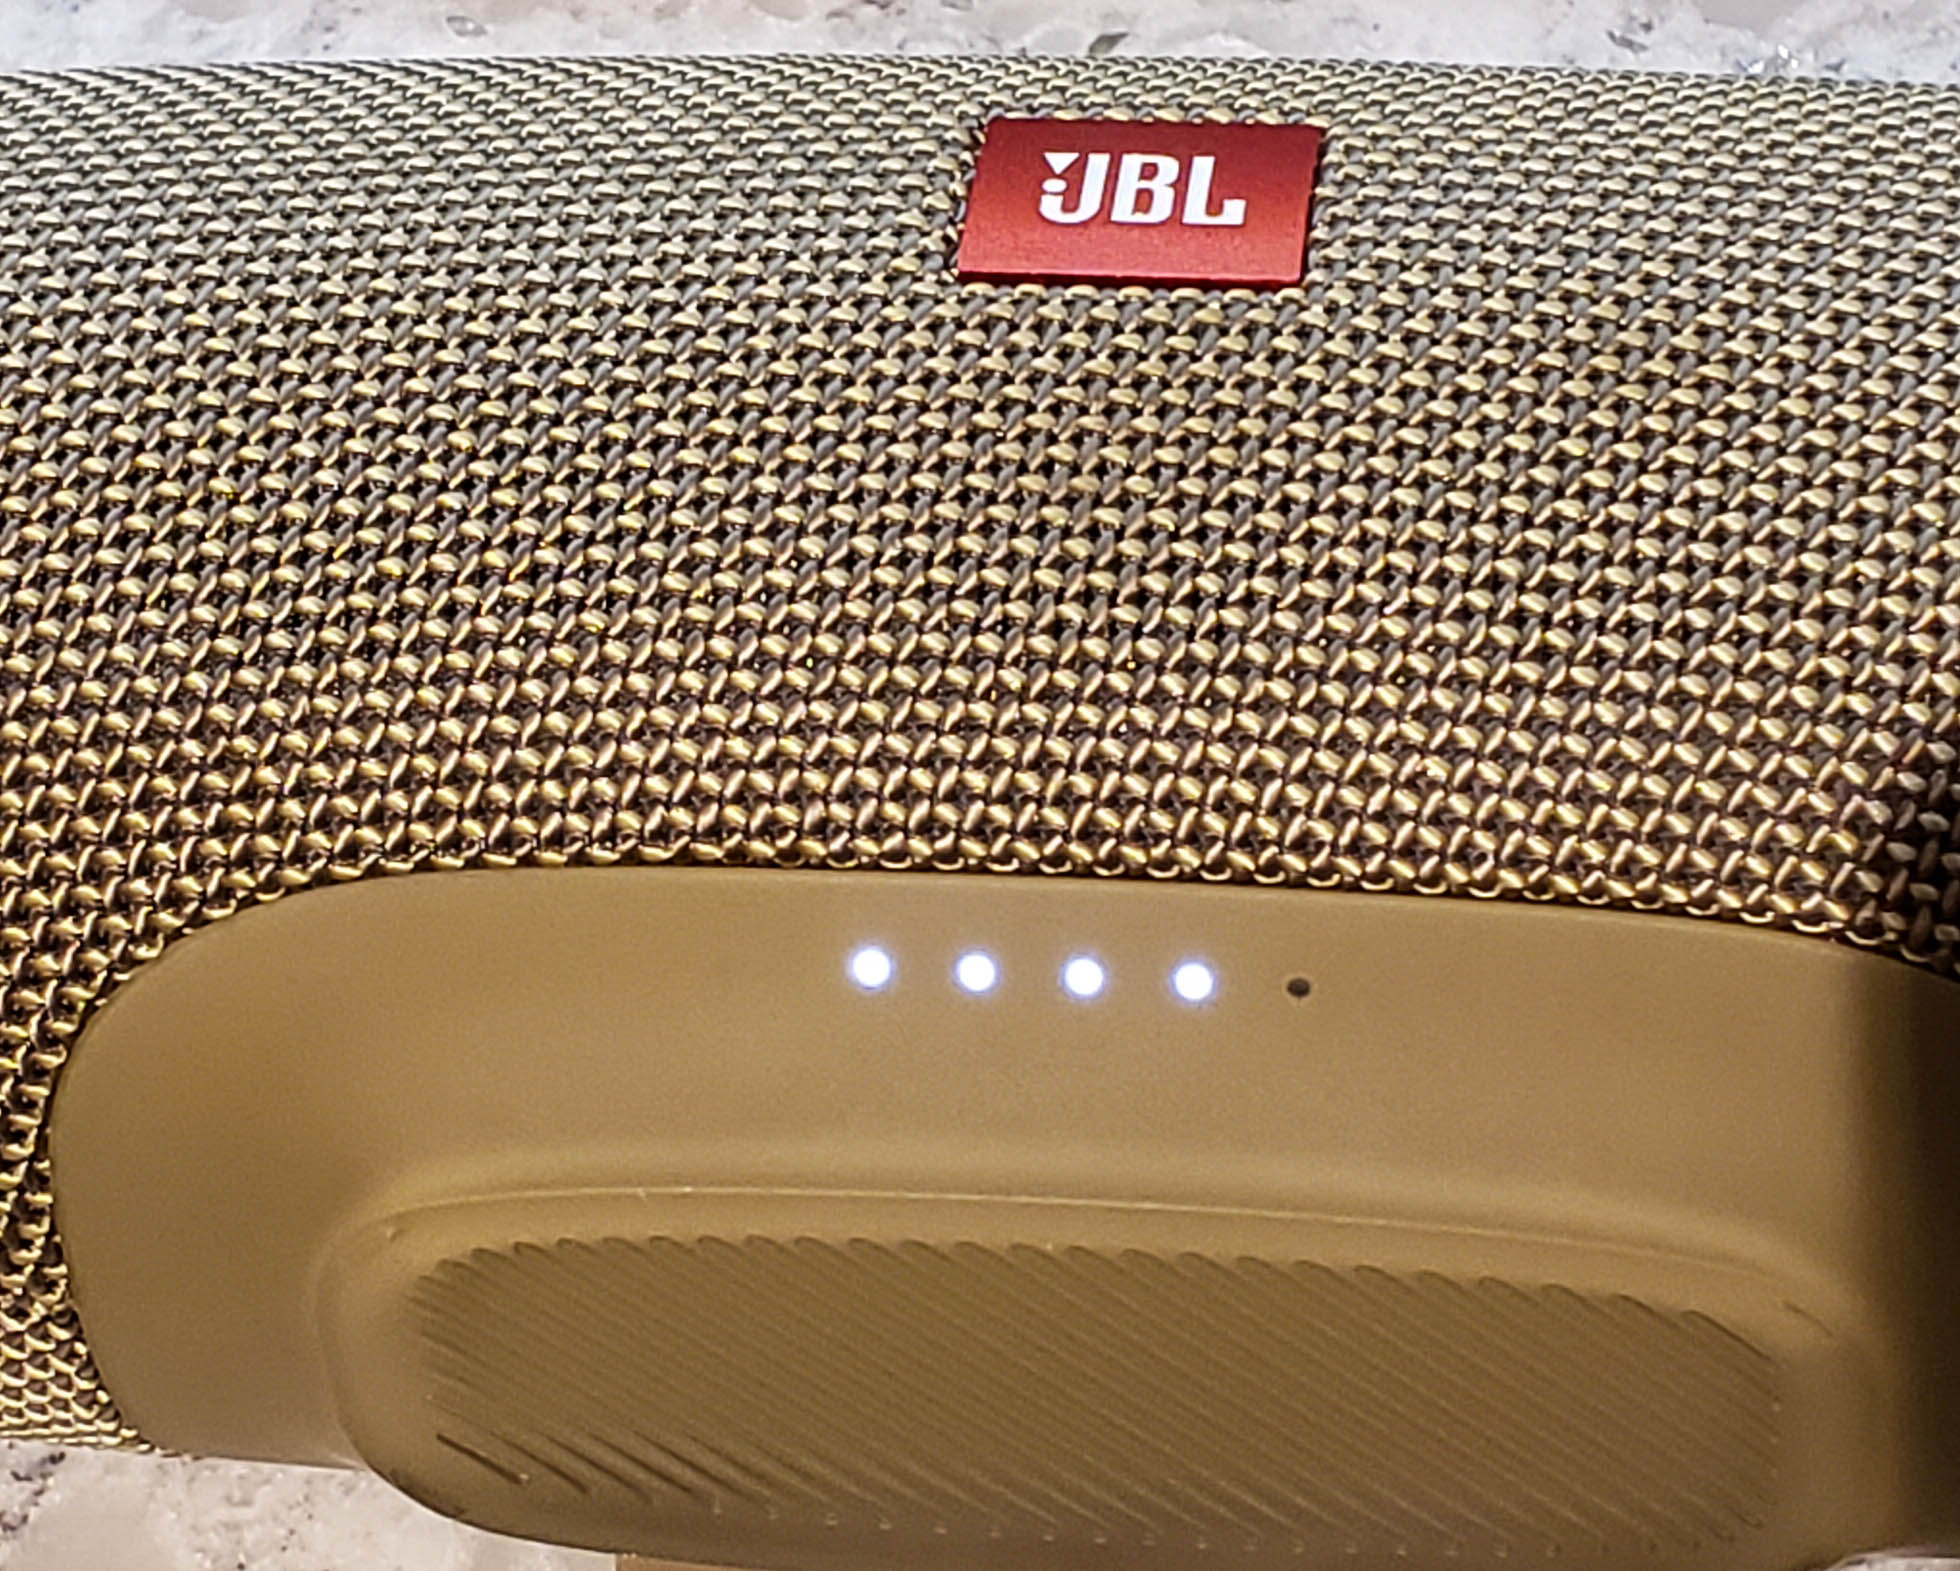 JBL Charge 4 review: The outdoor party speaker besides the pool - Dignited